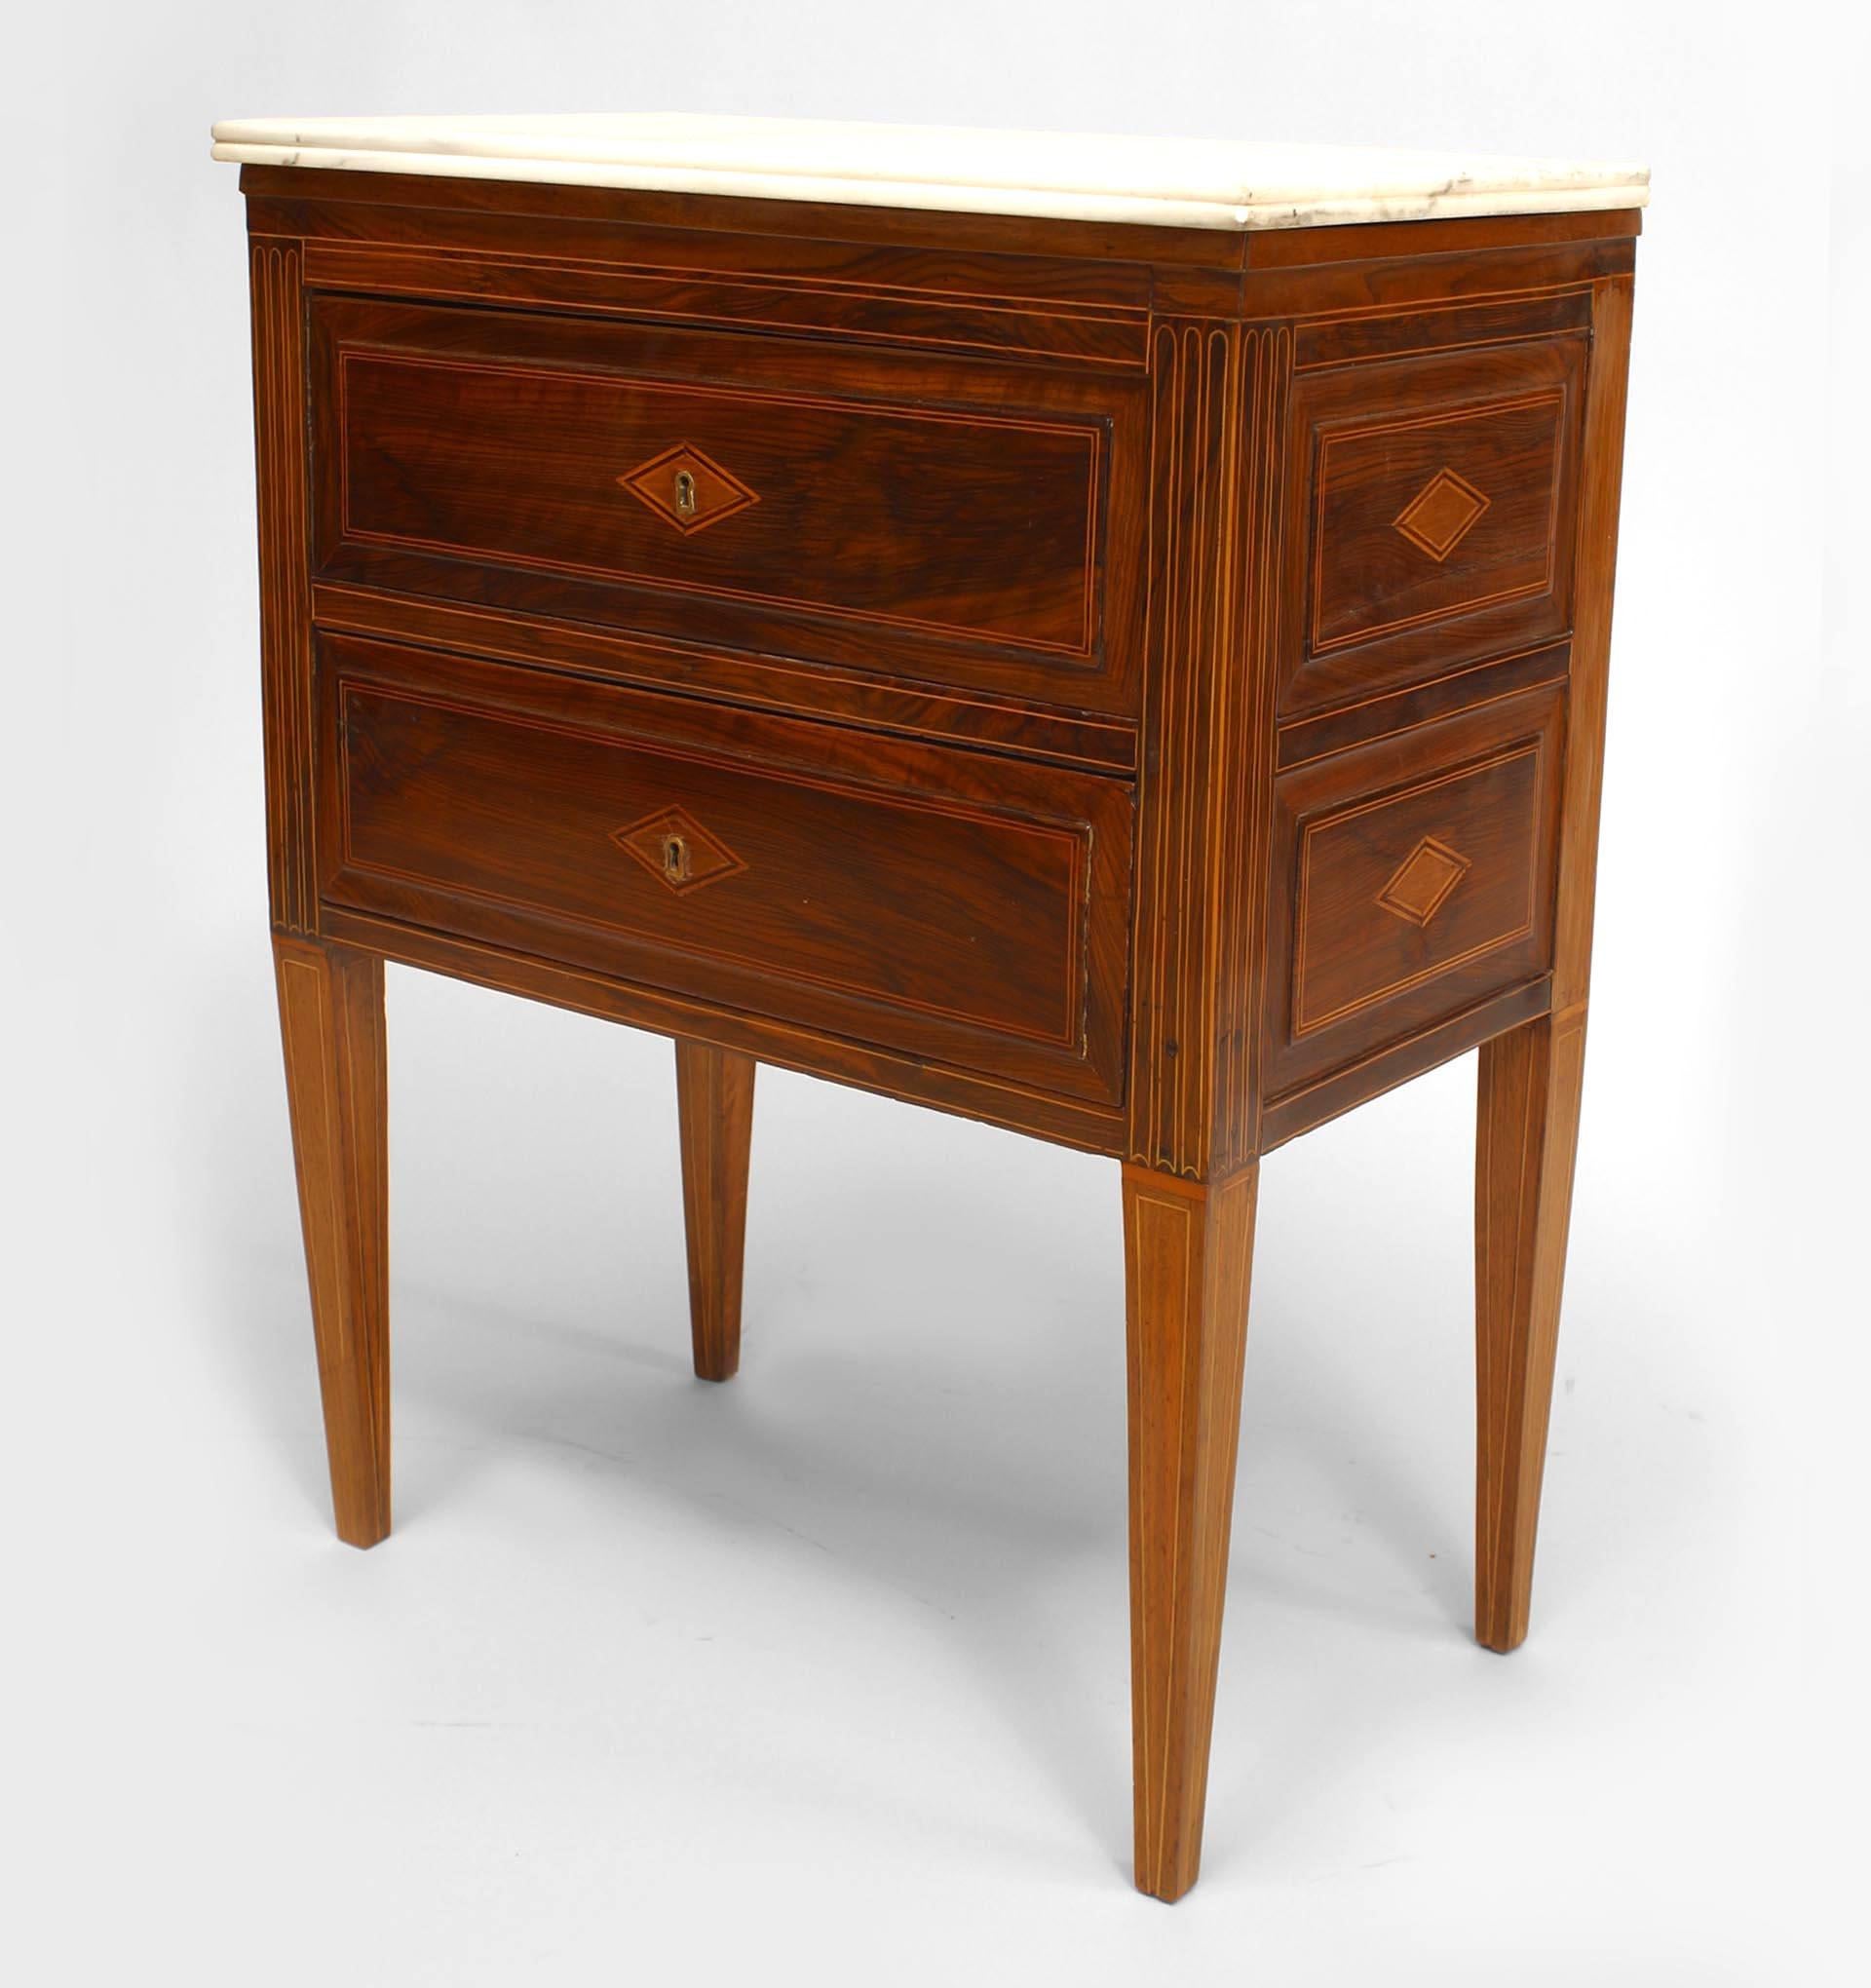 Italian Neoclassic-style (18/19th Century) rosewood and satinwood small commode with inlaid design, two drawers, and white marble top.
